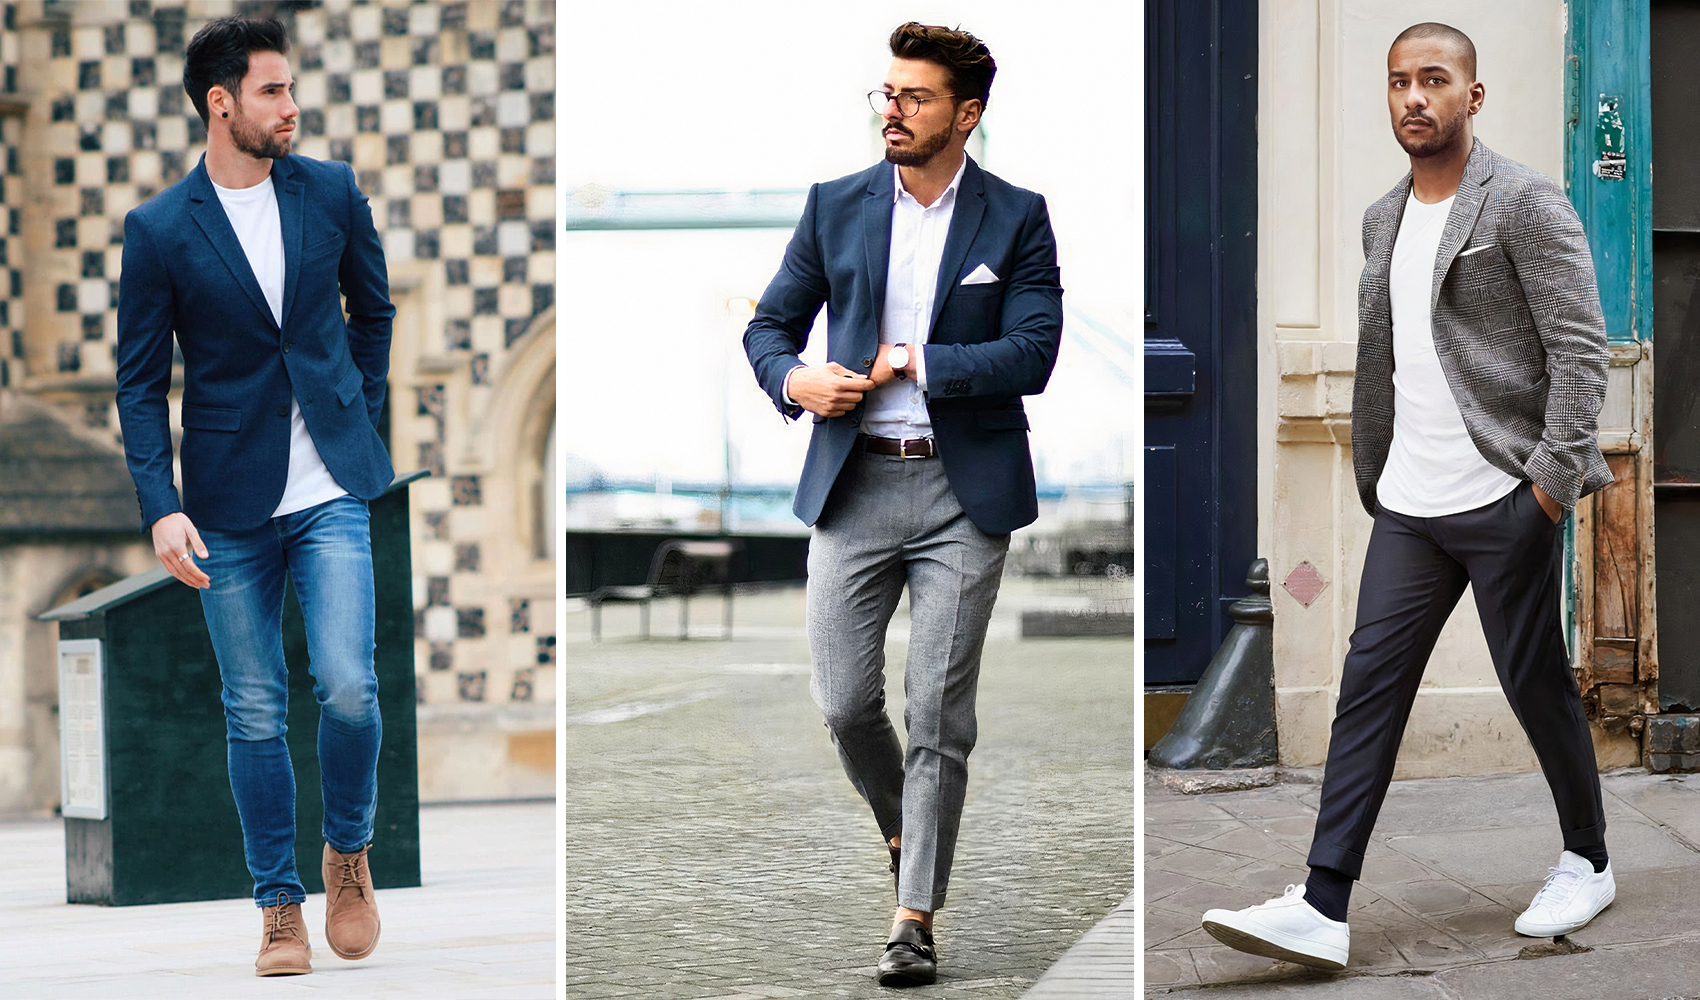 Men's Business Casual Outfits: The Smart Work Dress Code